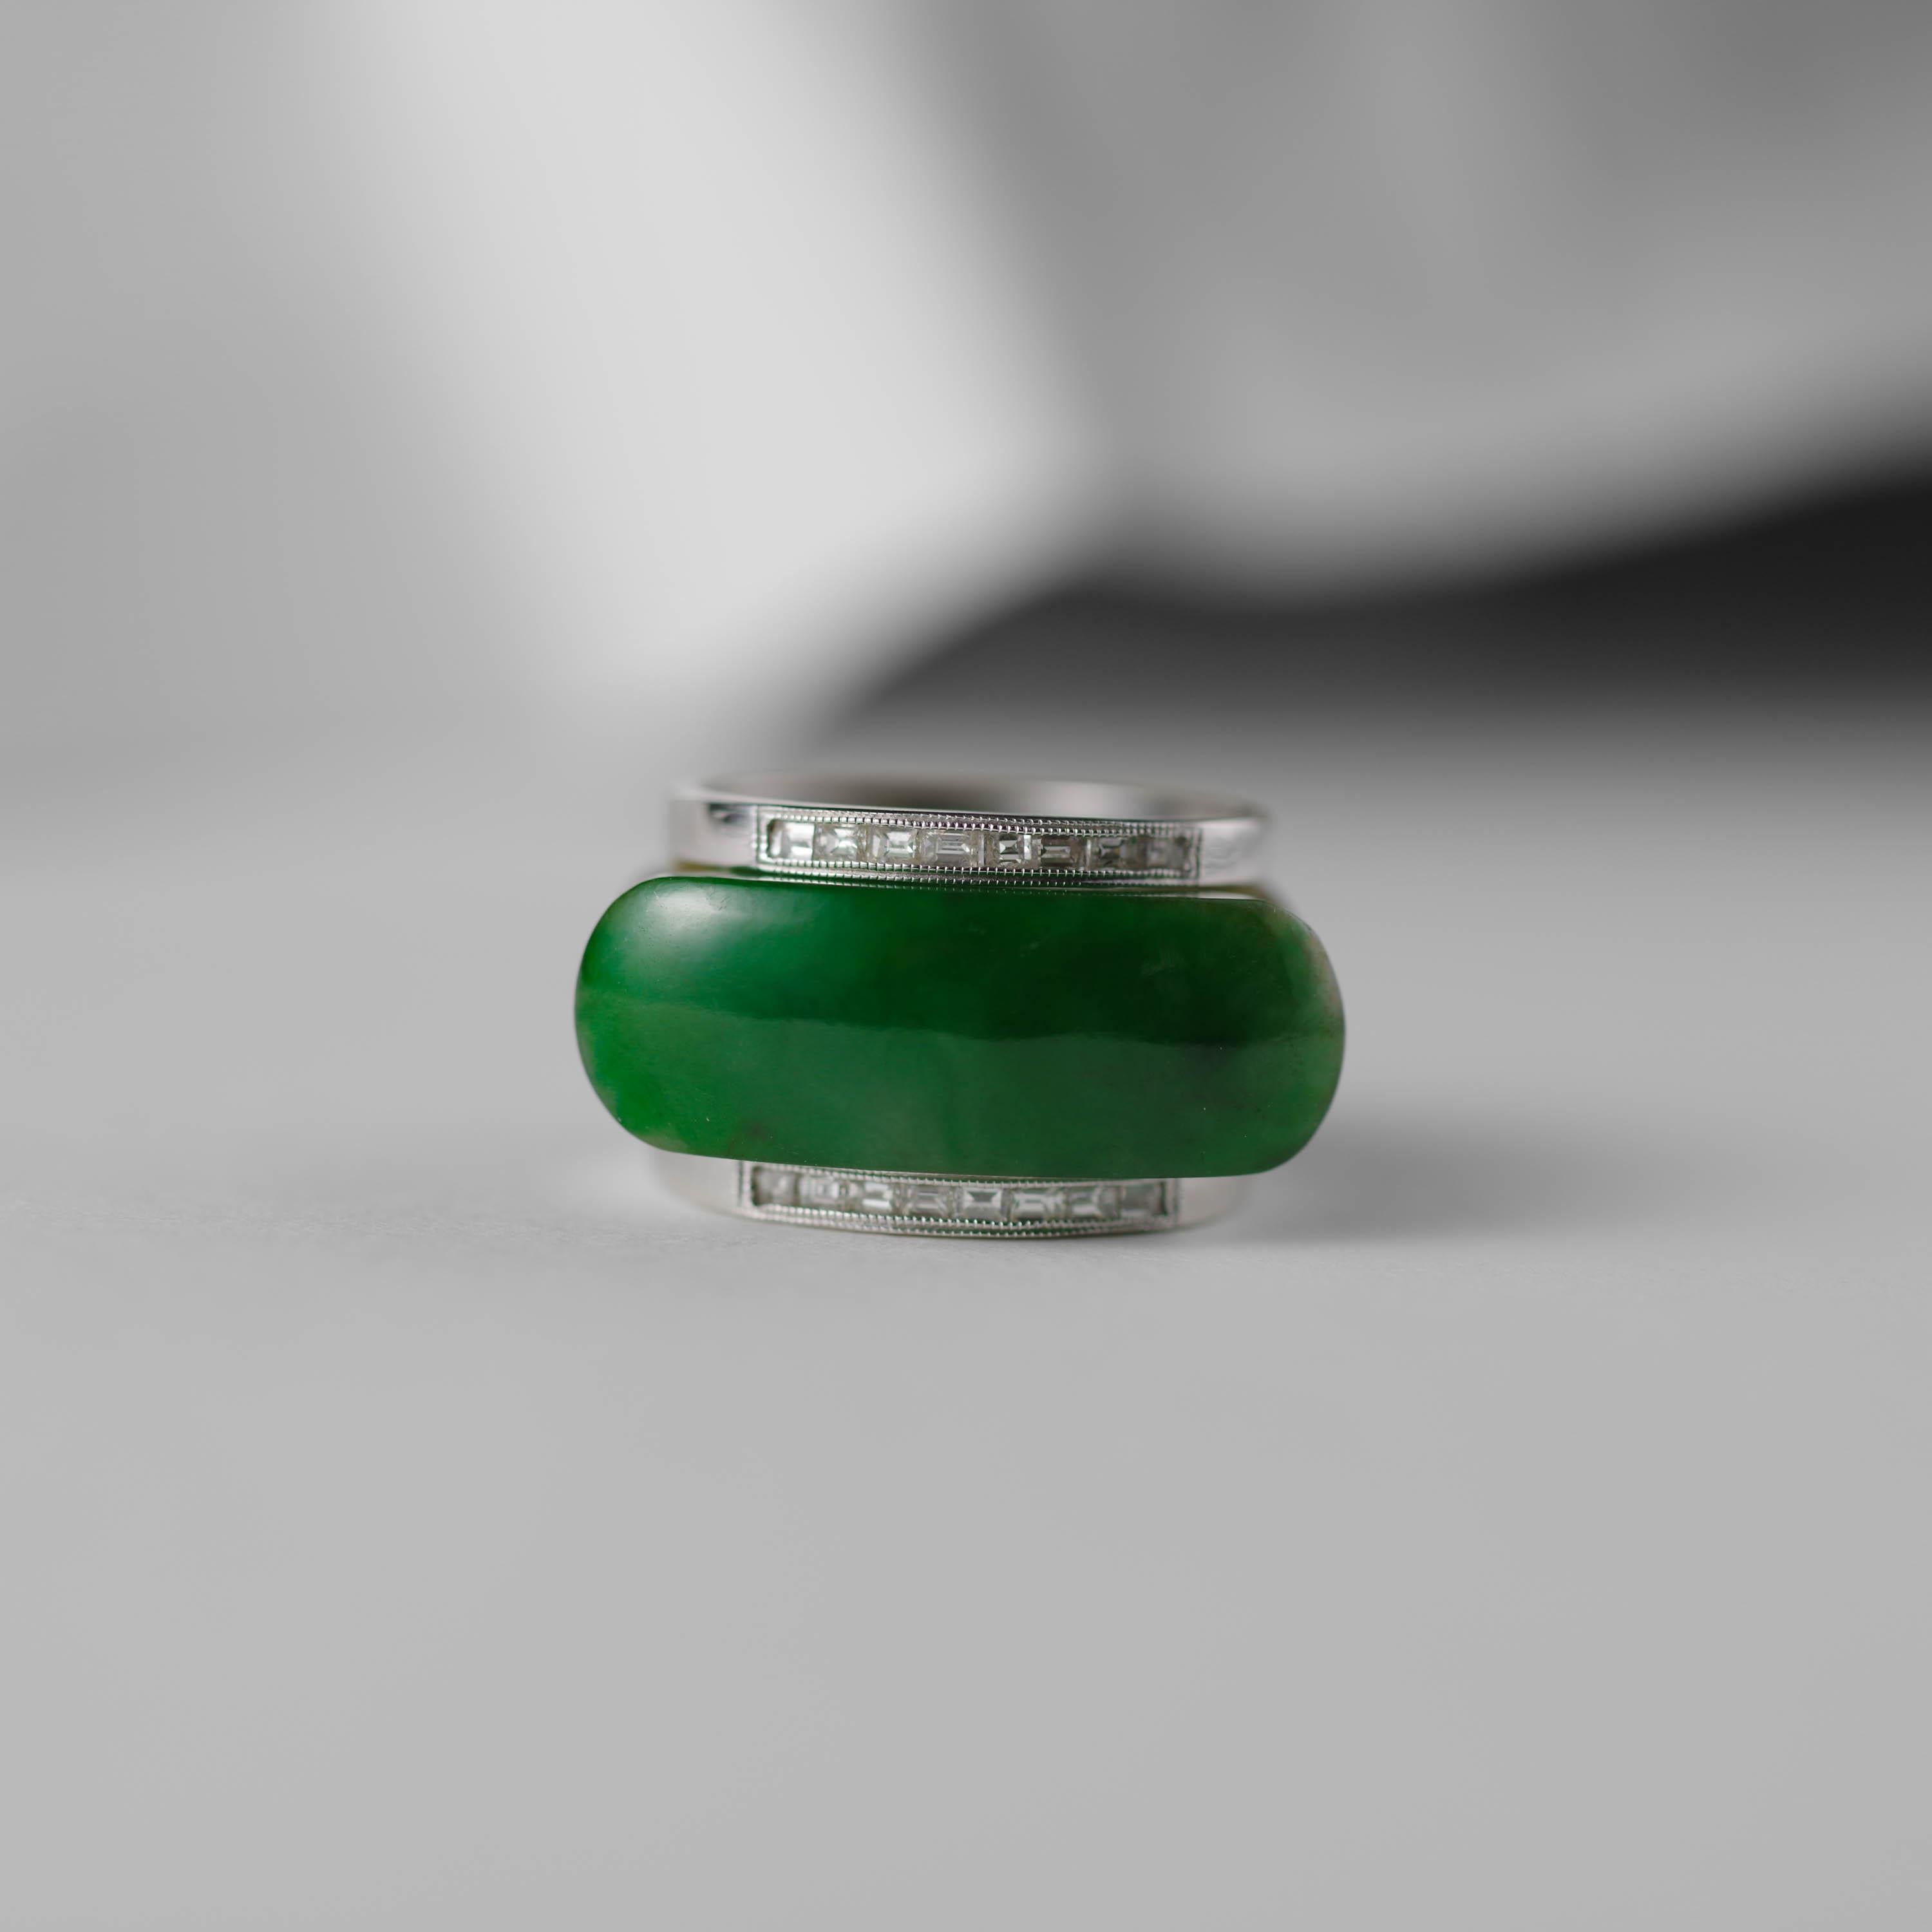 Hand-carved from a translucent stone of natural and untreated Burmese jadeite jade, this rather astonishing ring is among the most unique and extraordinary jade rings in my collection.

Jadeite with a humble body color of mottled greenish-brown has